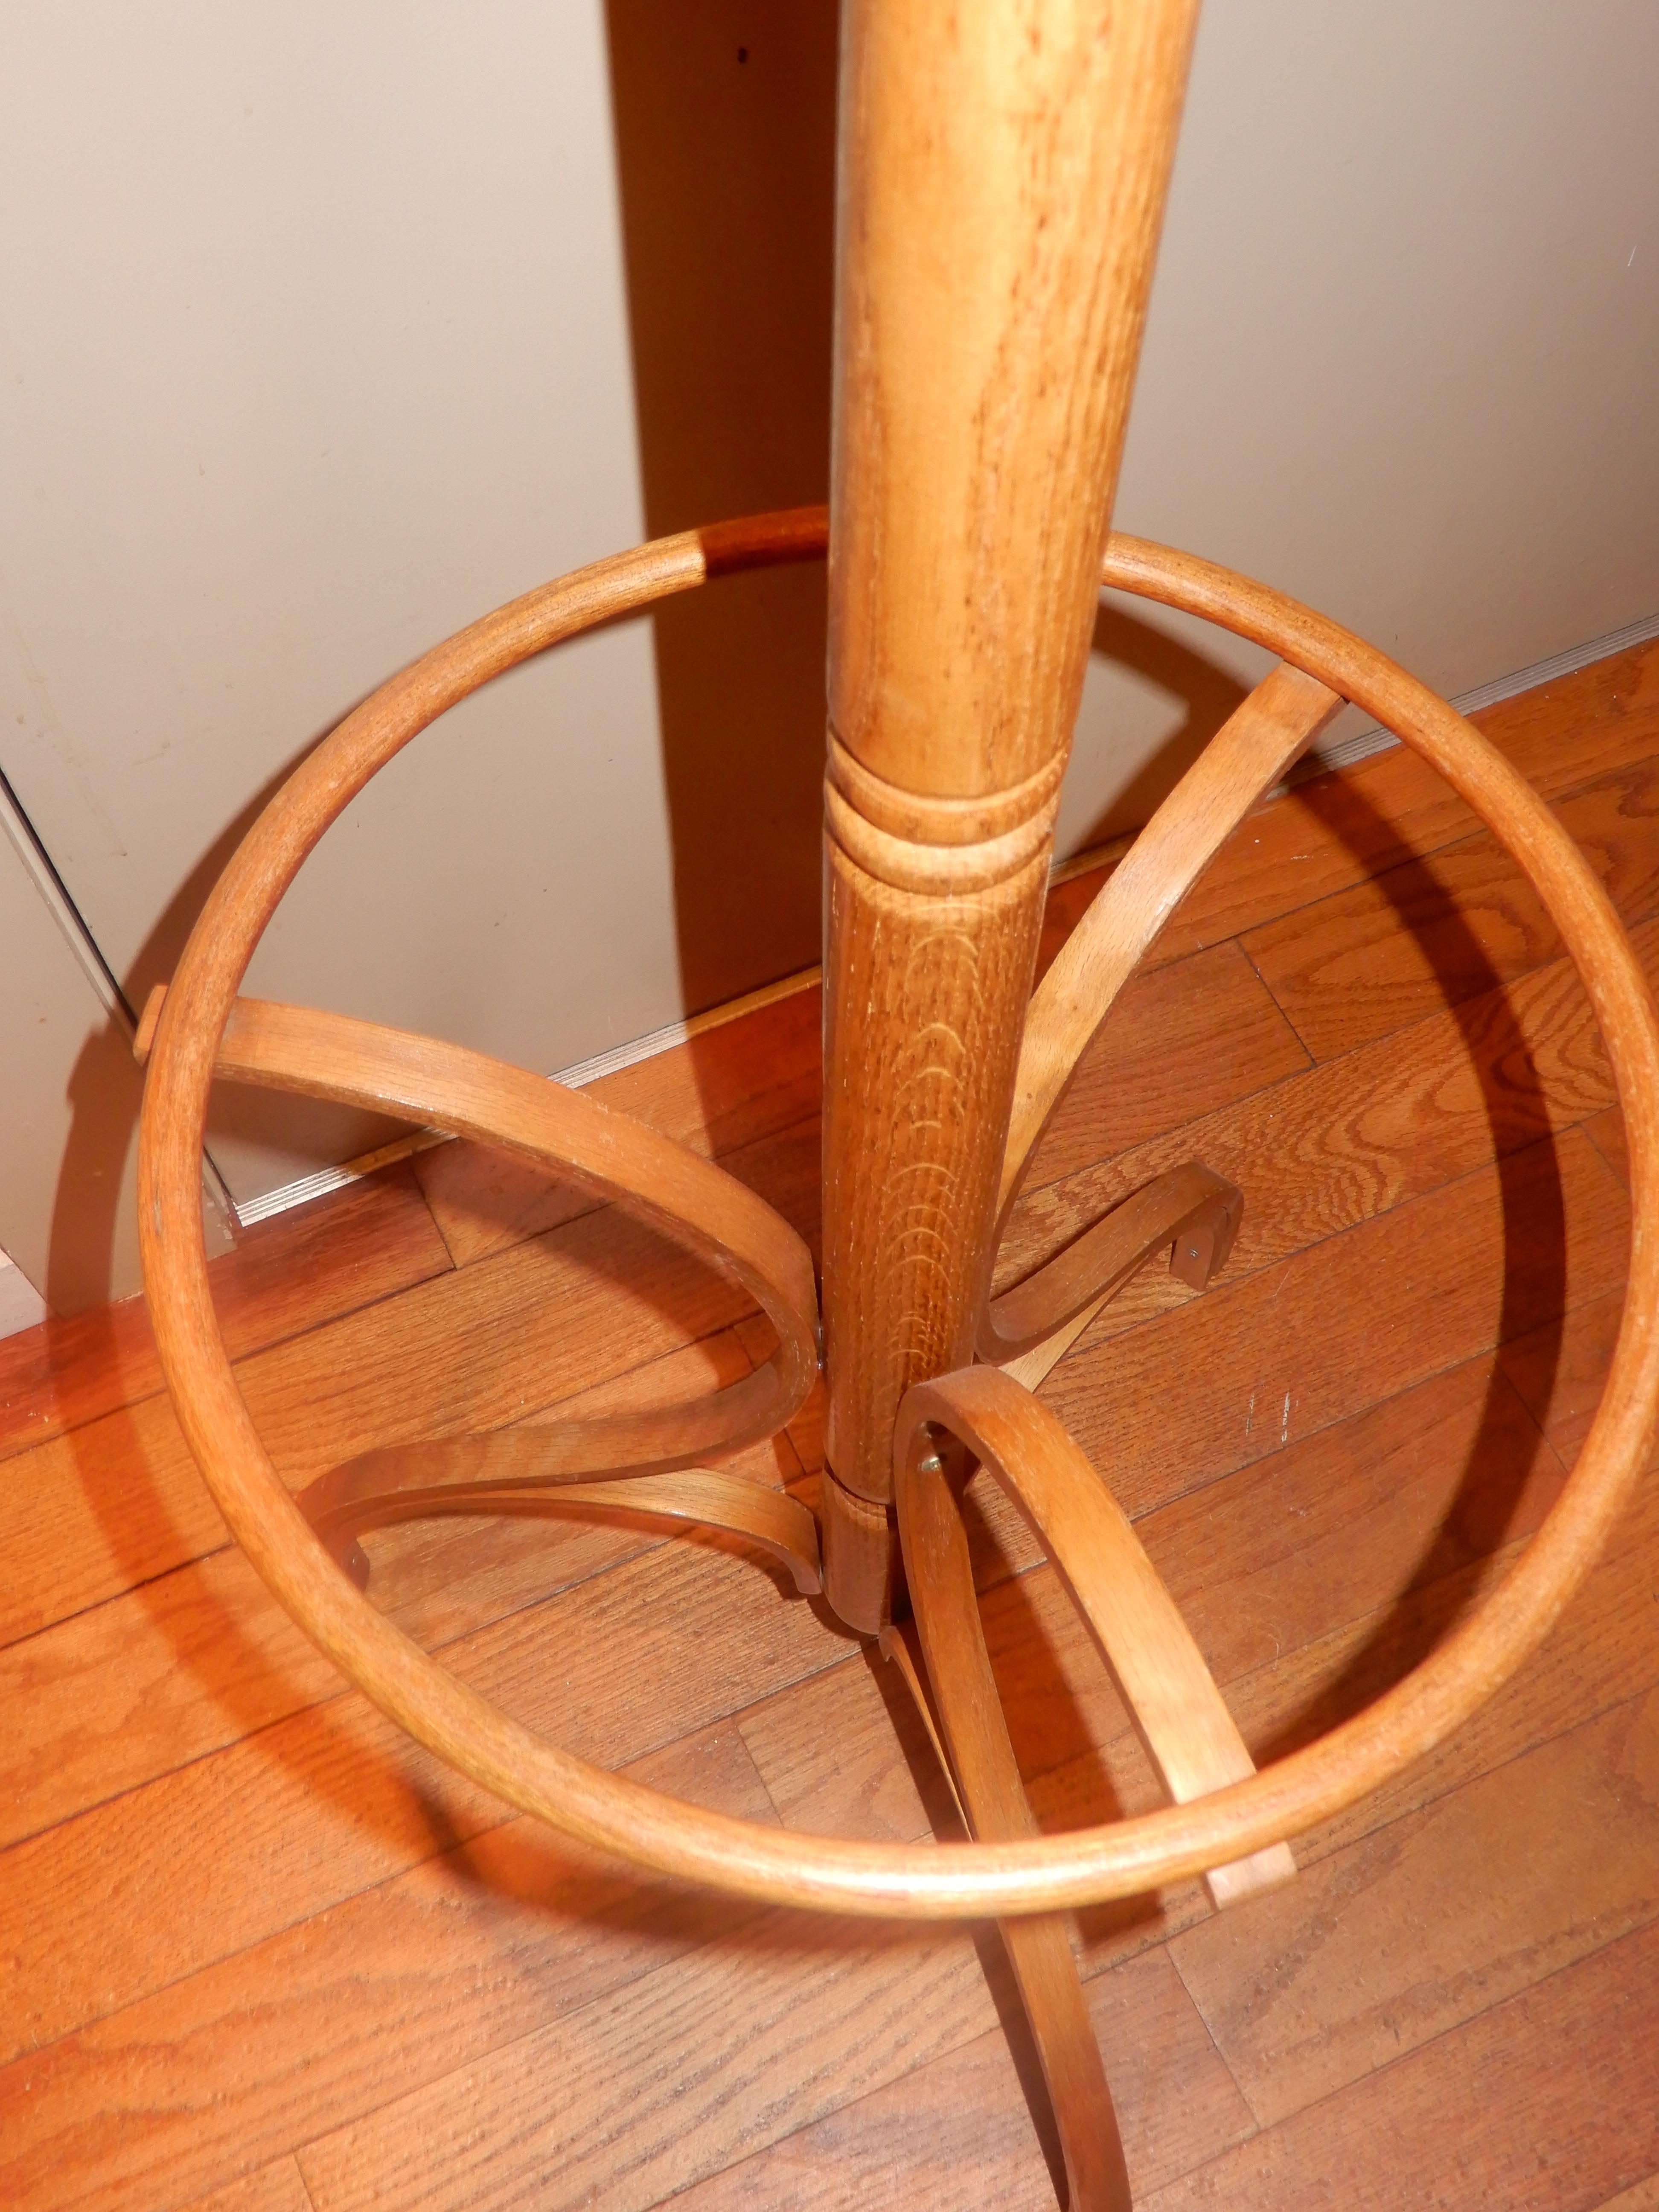 20th Century American Handcrafted White Oak Coat Stand For Sale